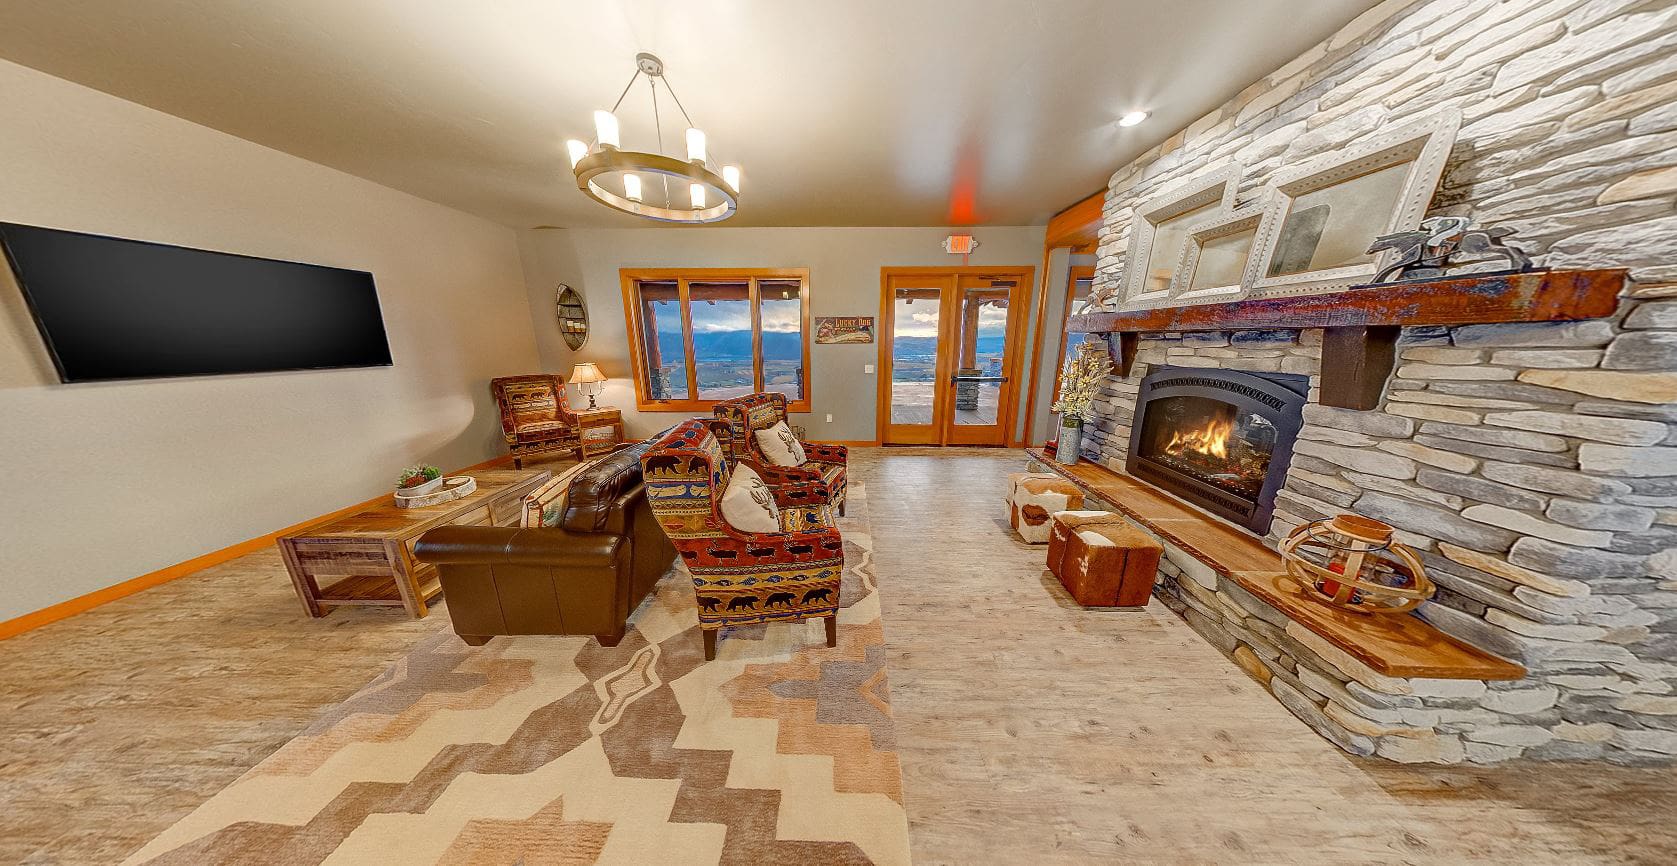 Secondary living room with rock fireplace